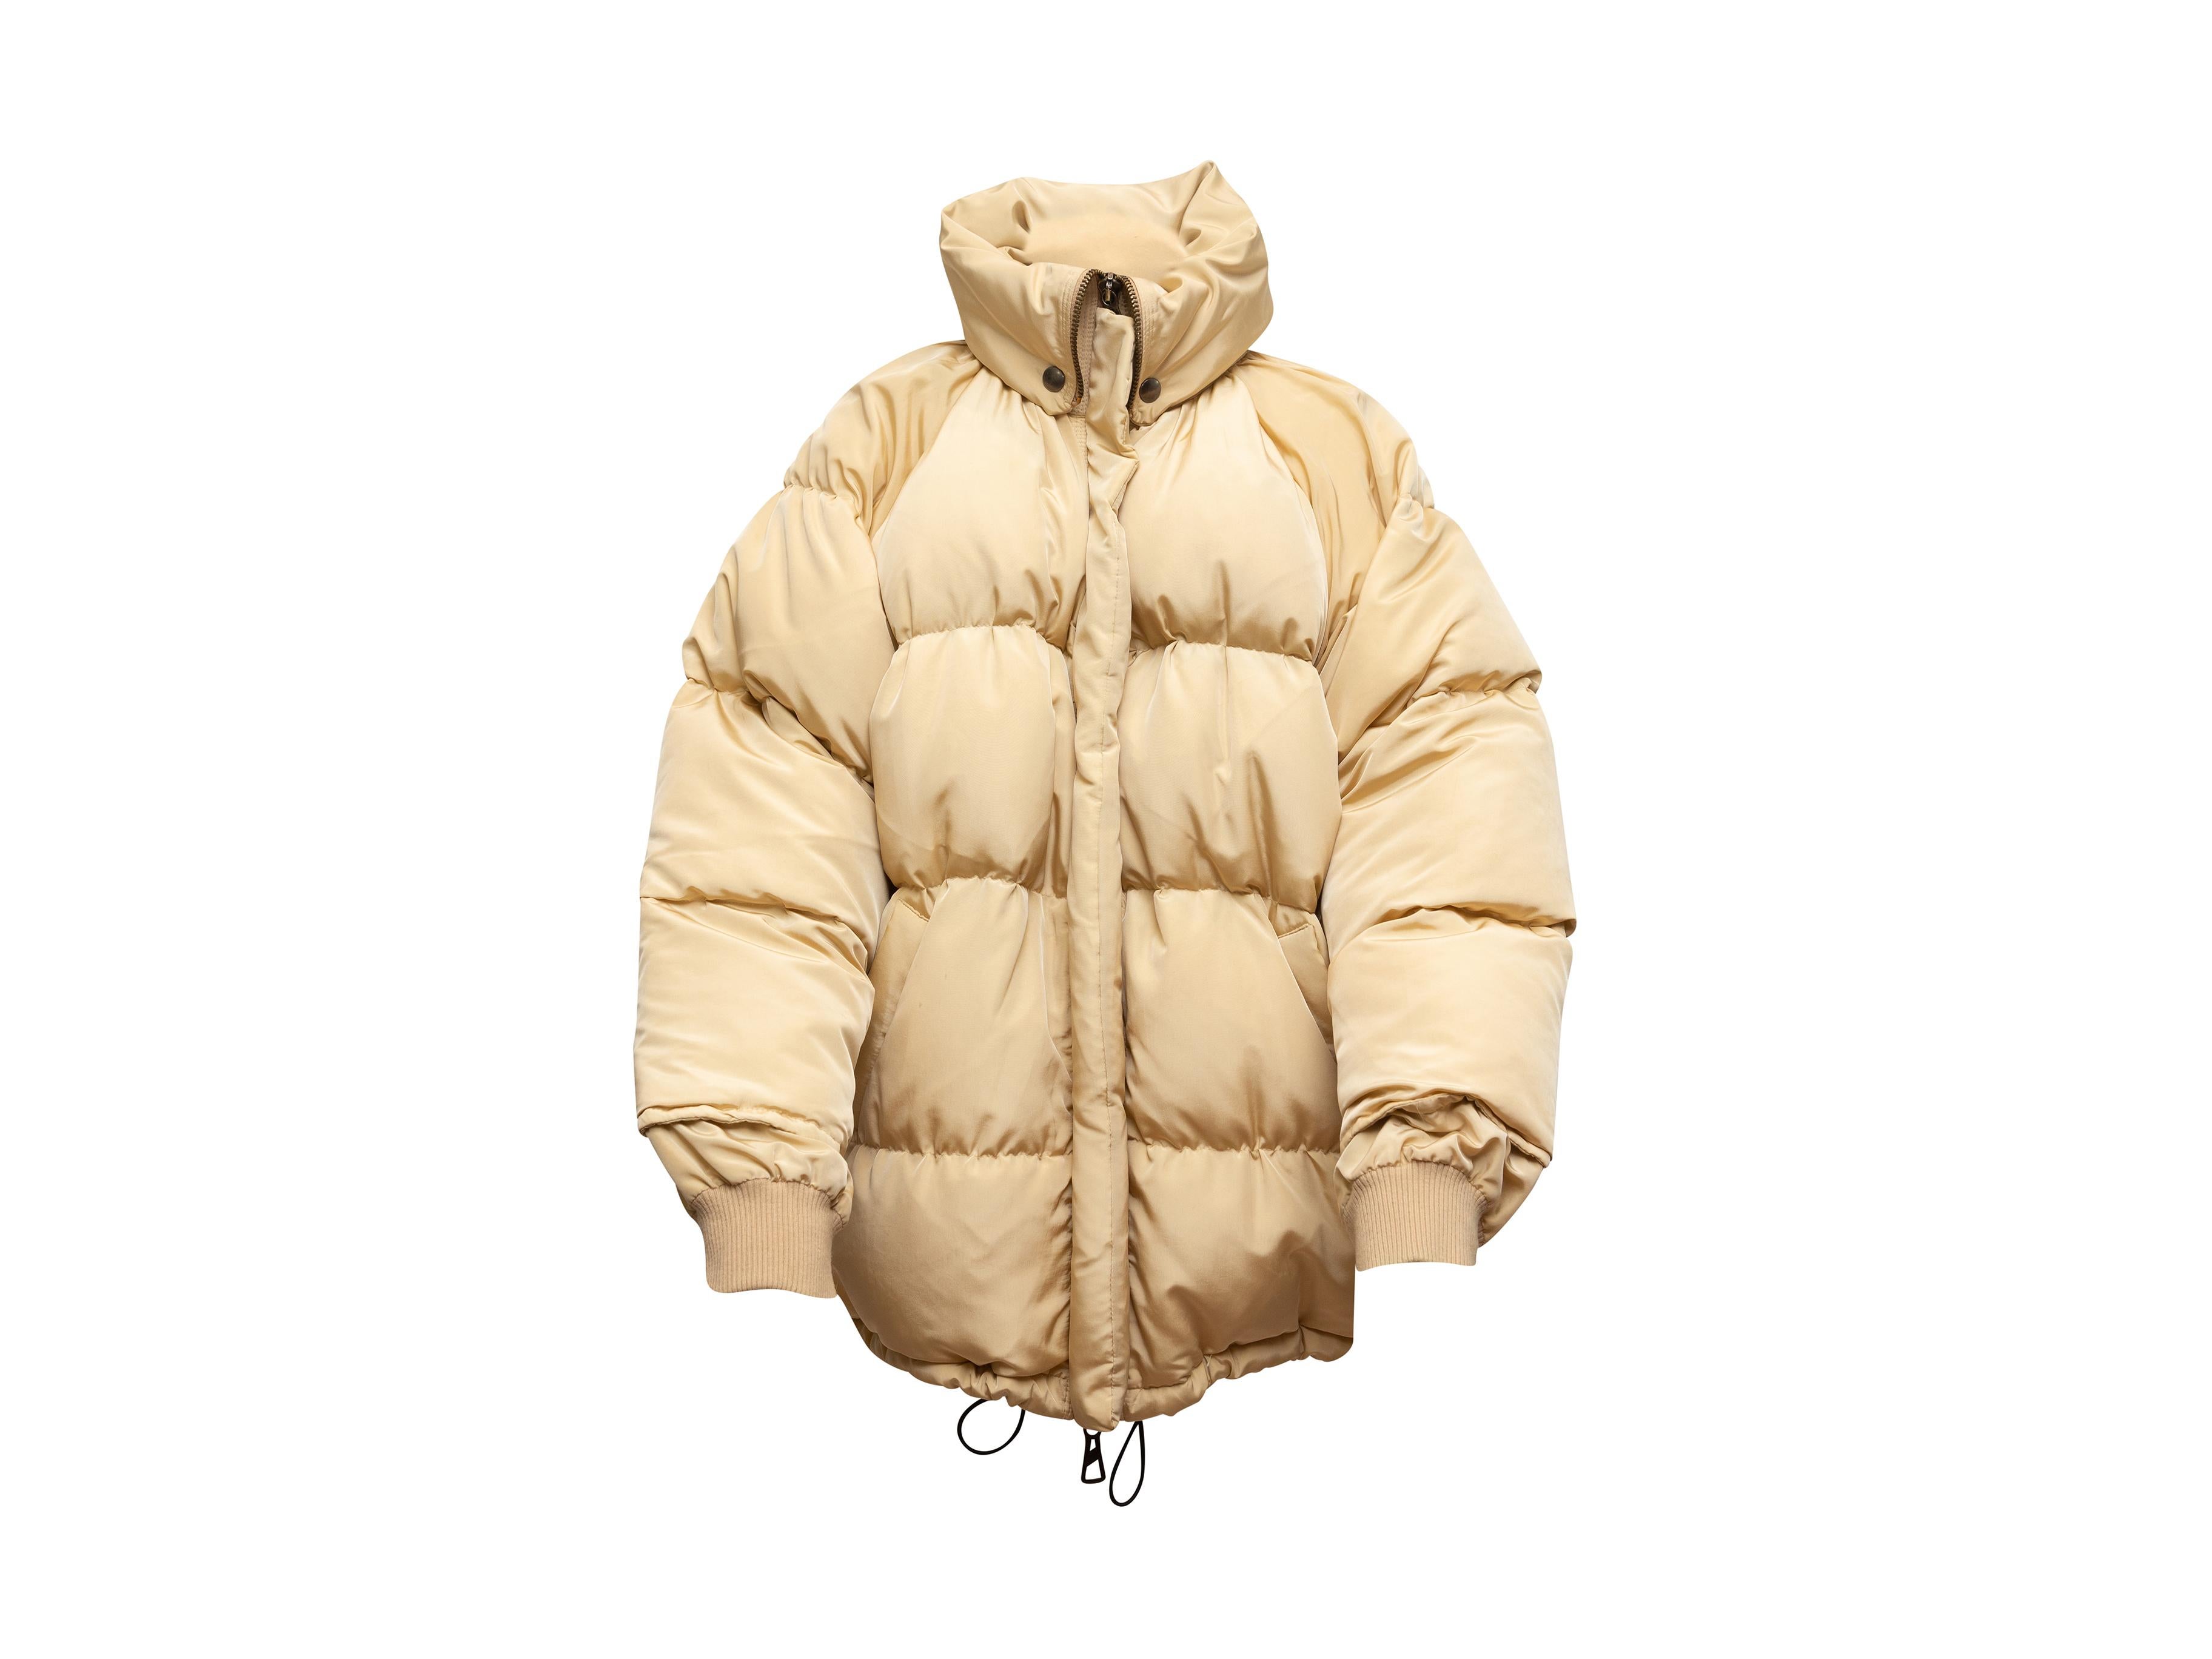 Product details: Vintage beige oversize puffer coat by Jean Paul Gaultier. Rib knit trim. Dual hip pockets. Zip closure at front. 47